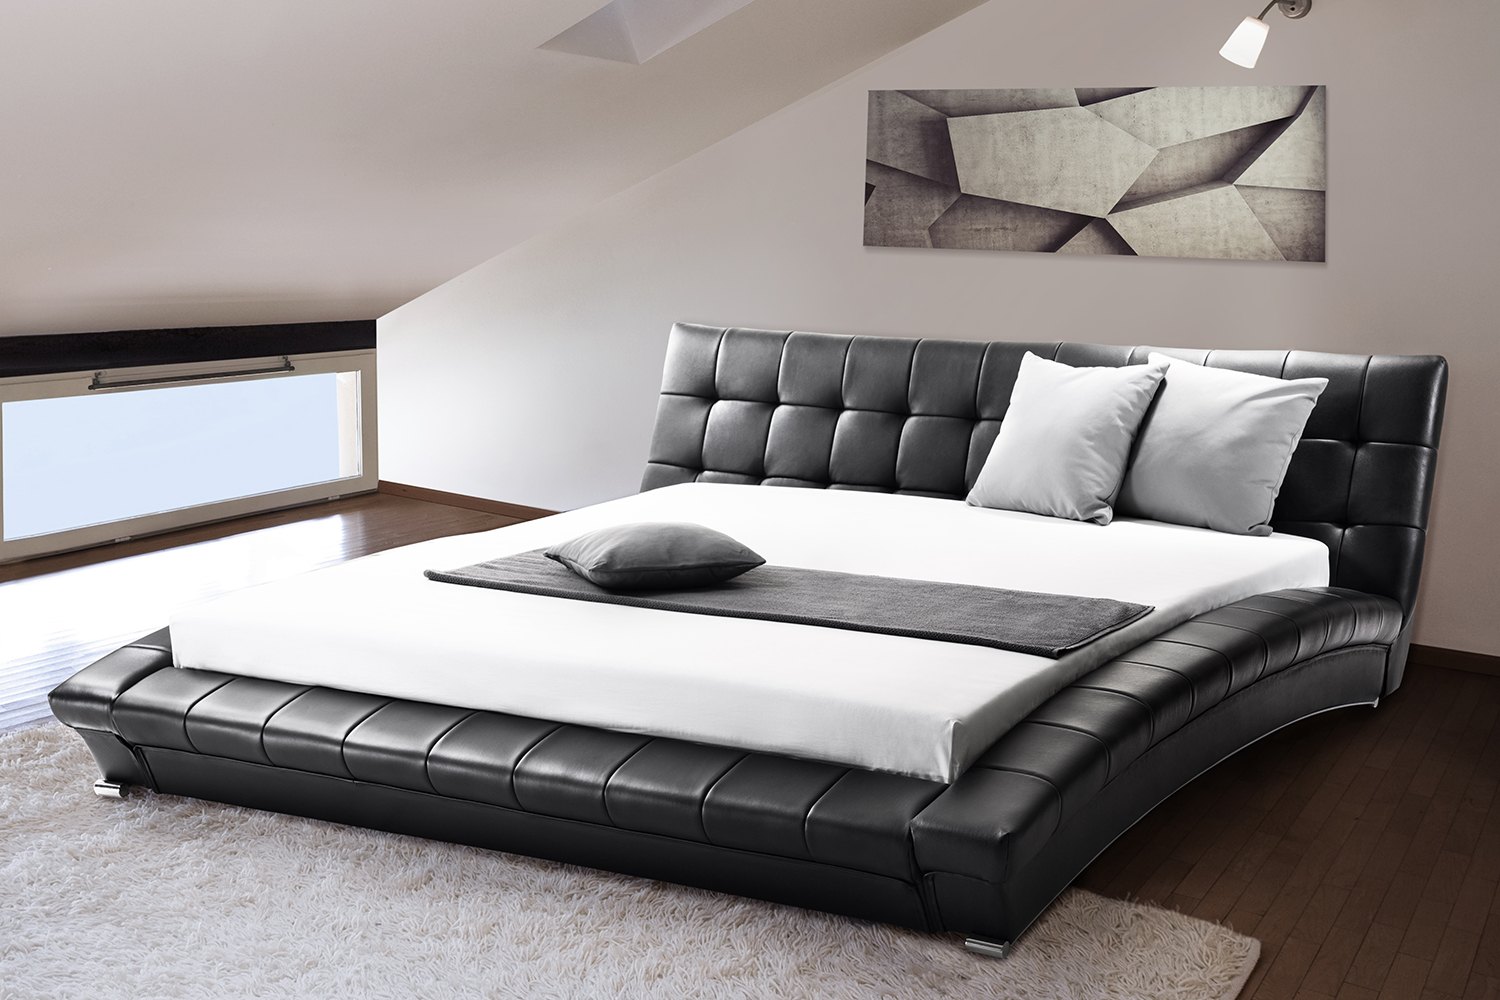 Bed Frames King Size To Buy - Eric Don blog